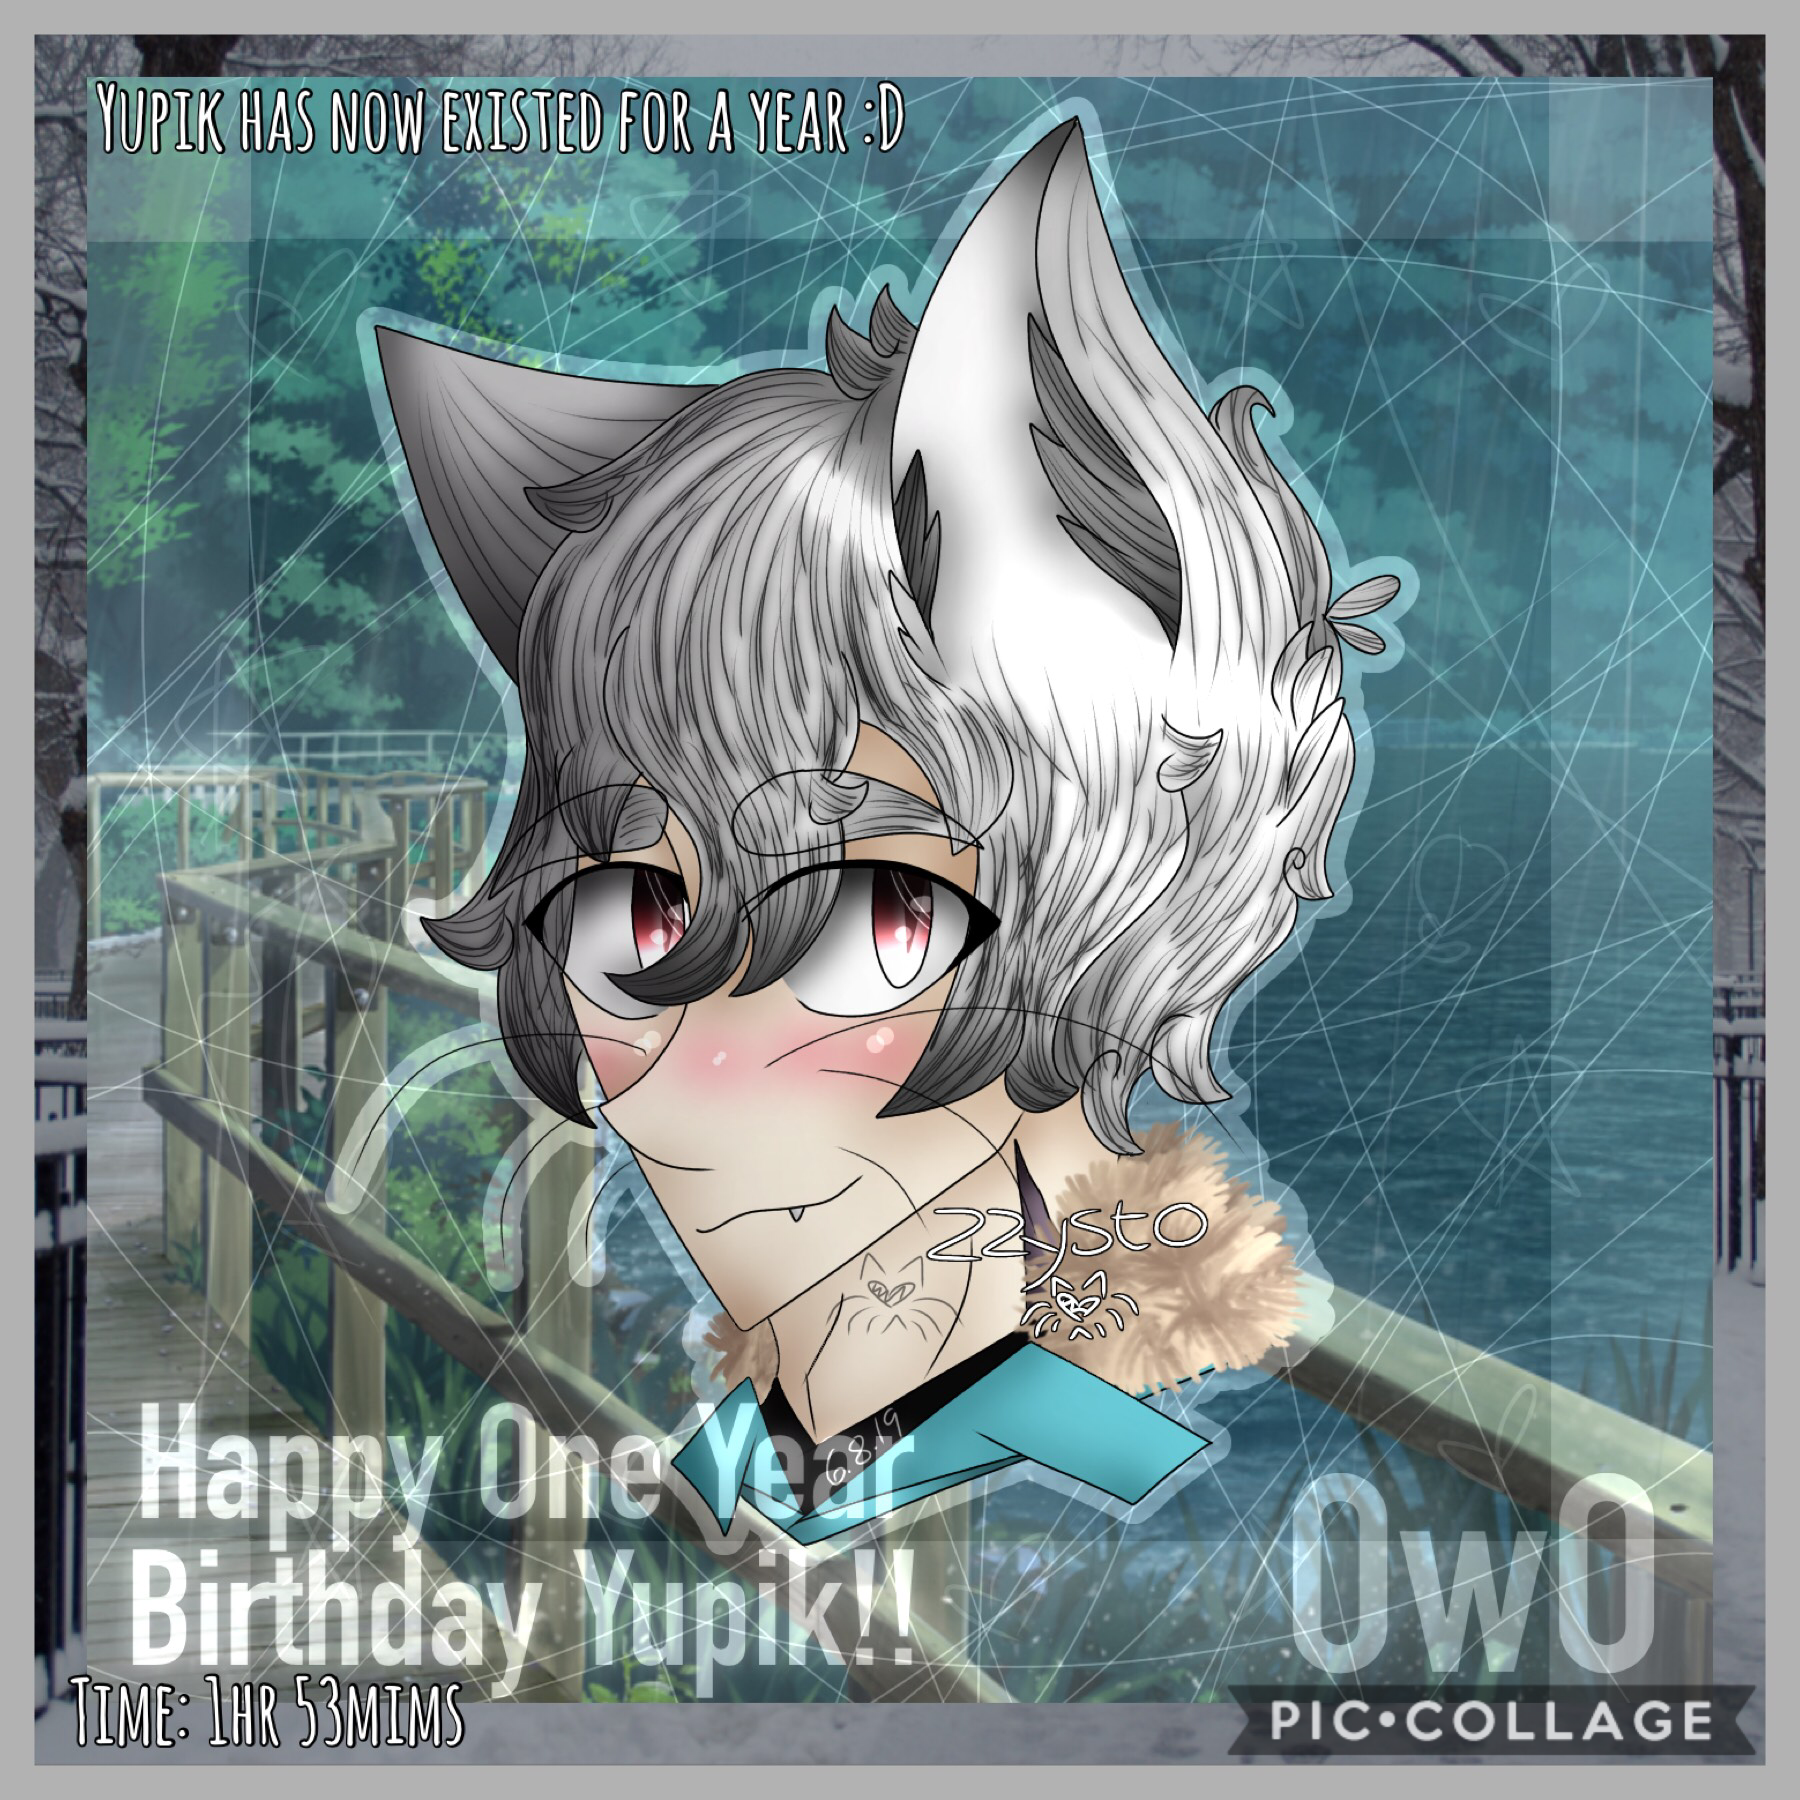 ❄️Tap❄️
wOo- I haven’t actually drawn Yupik since last November i-
hehe, he turns a year old today, exactly 11 months after Zysto’s creation uwu
Yupik blesses you all with a good day and night. He hopes nothing bad happens and all you feel is happiness ow